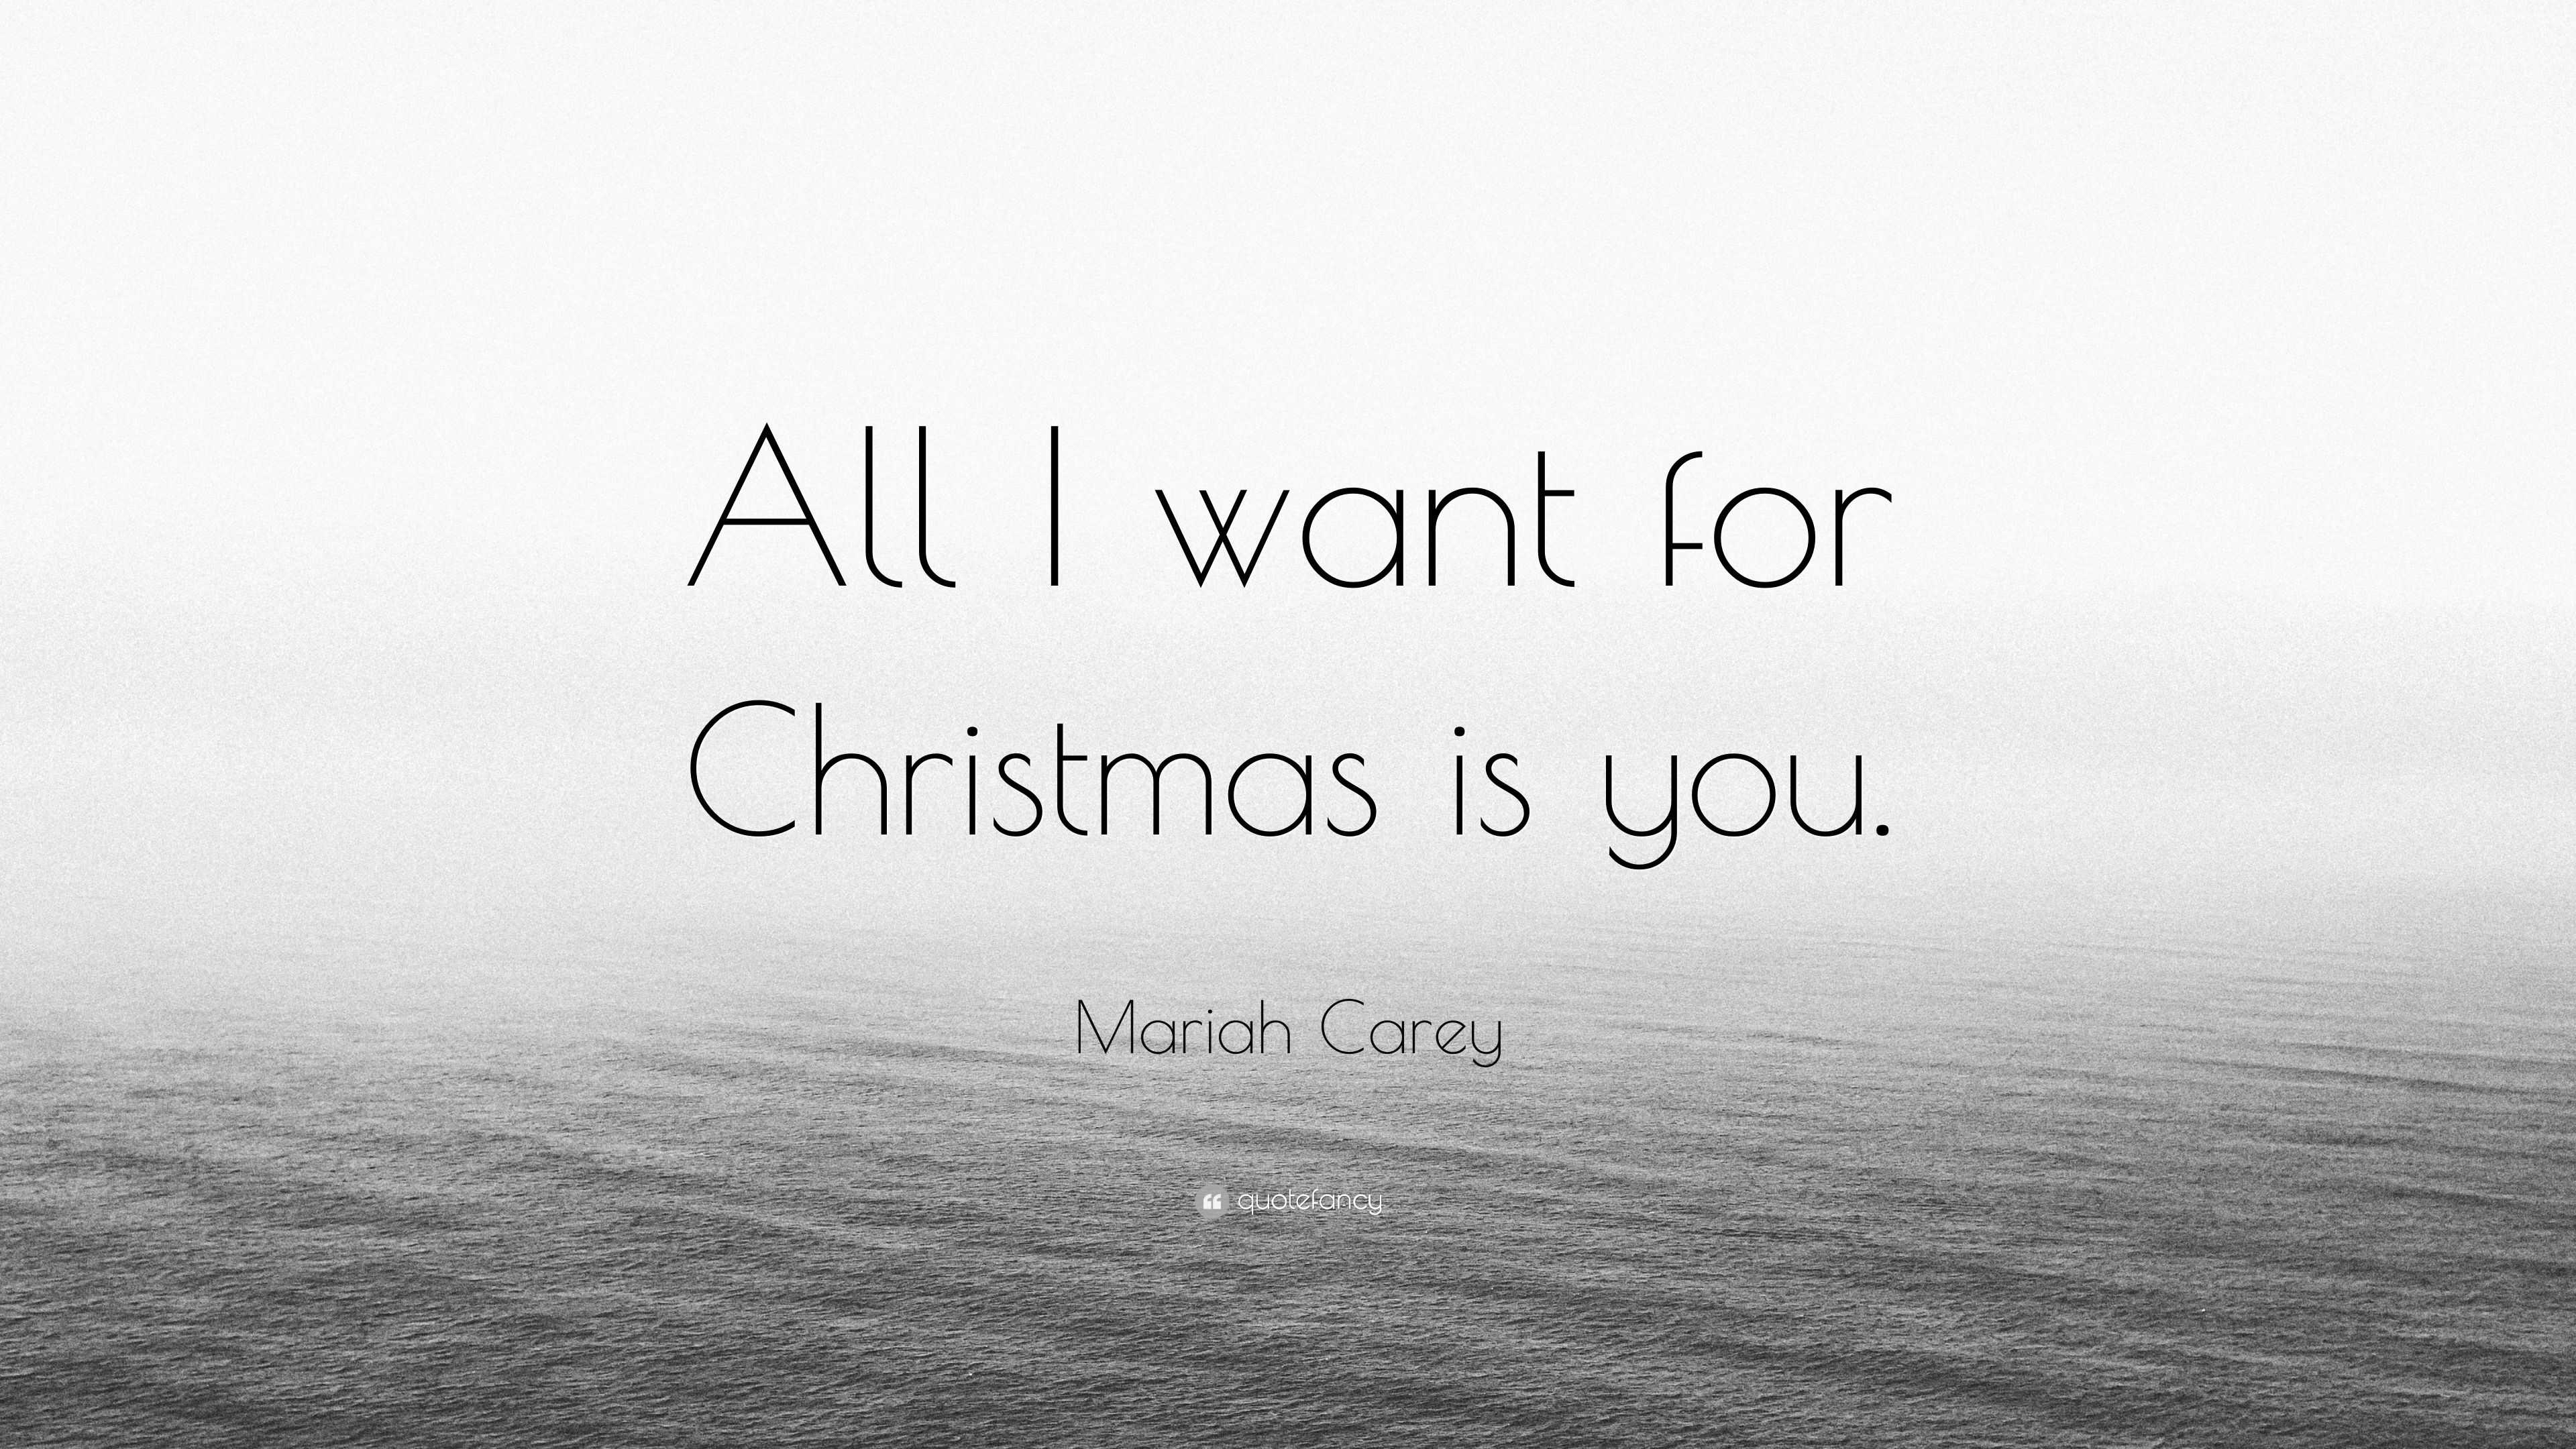 Mariah Carey Quote: “All I want for Christmas is you.”